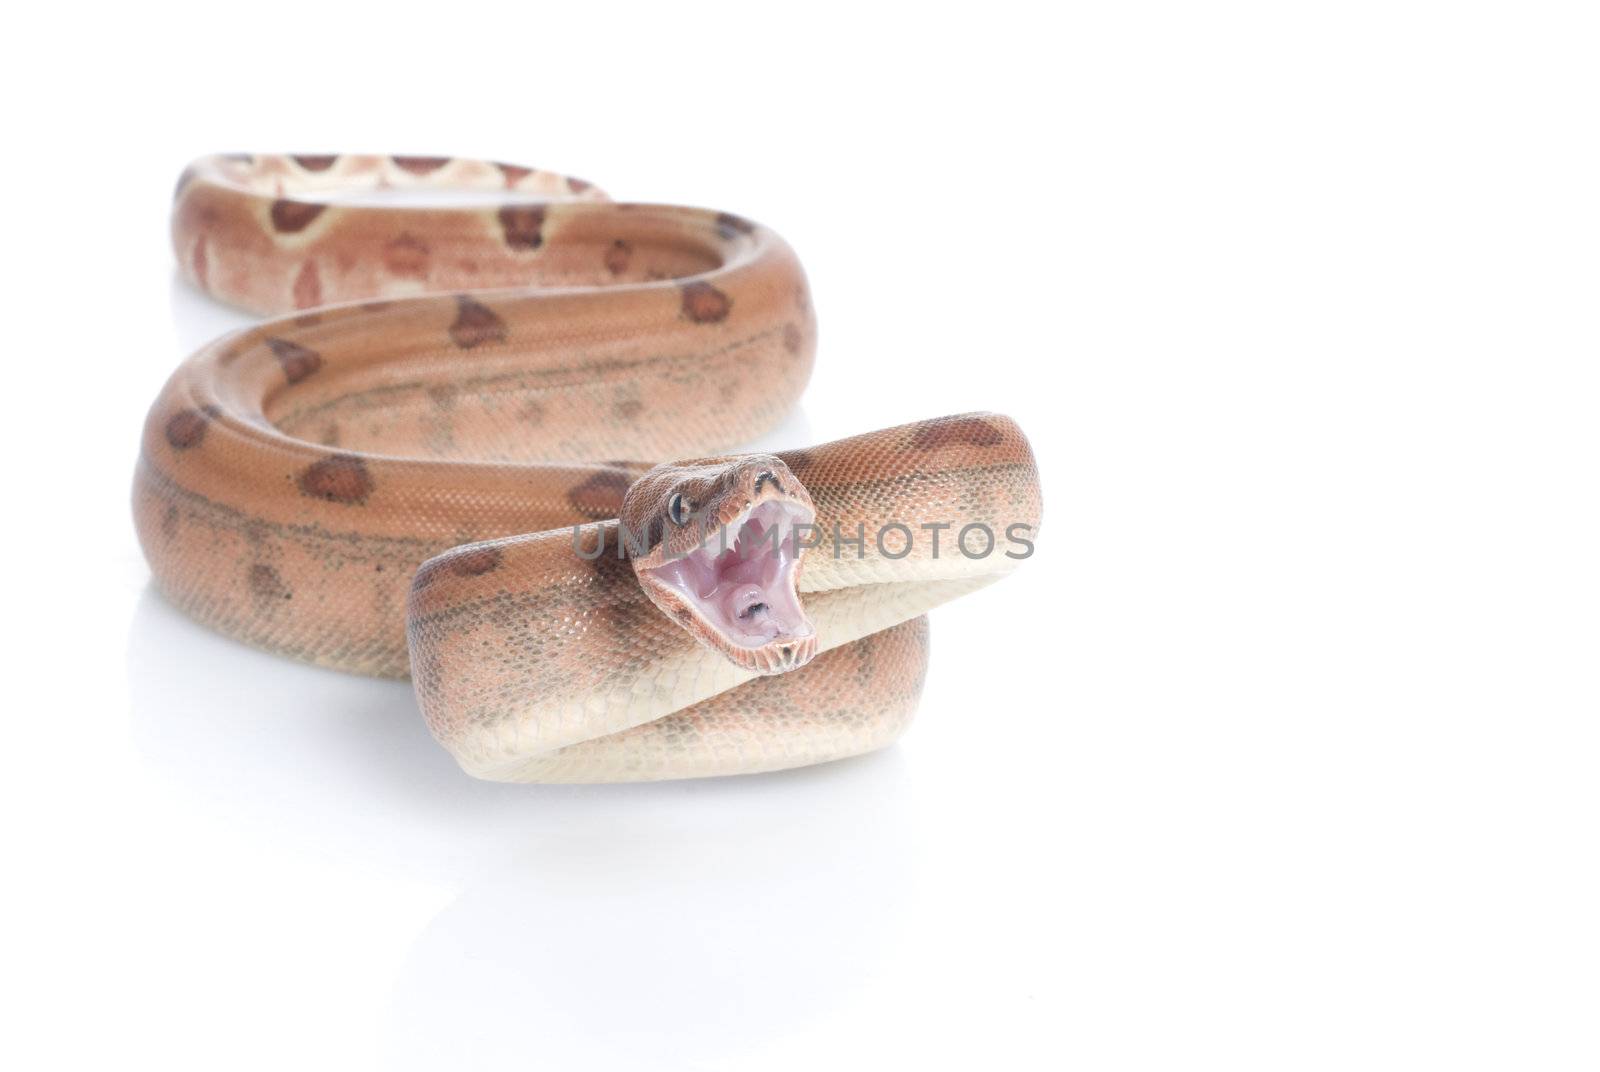 Hypo Redtail Boa by Njean